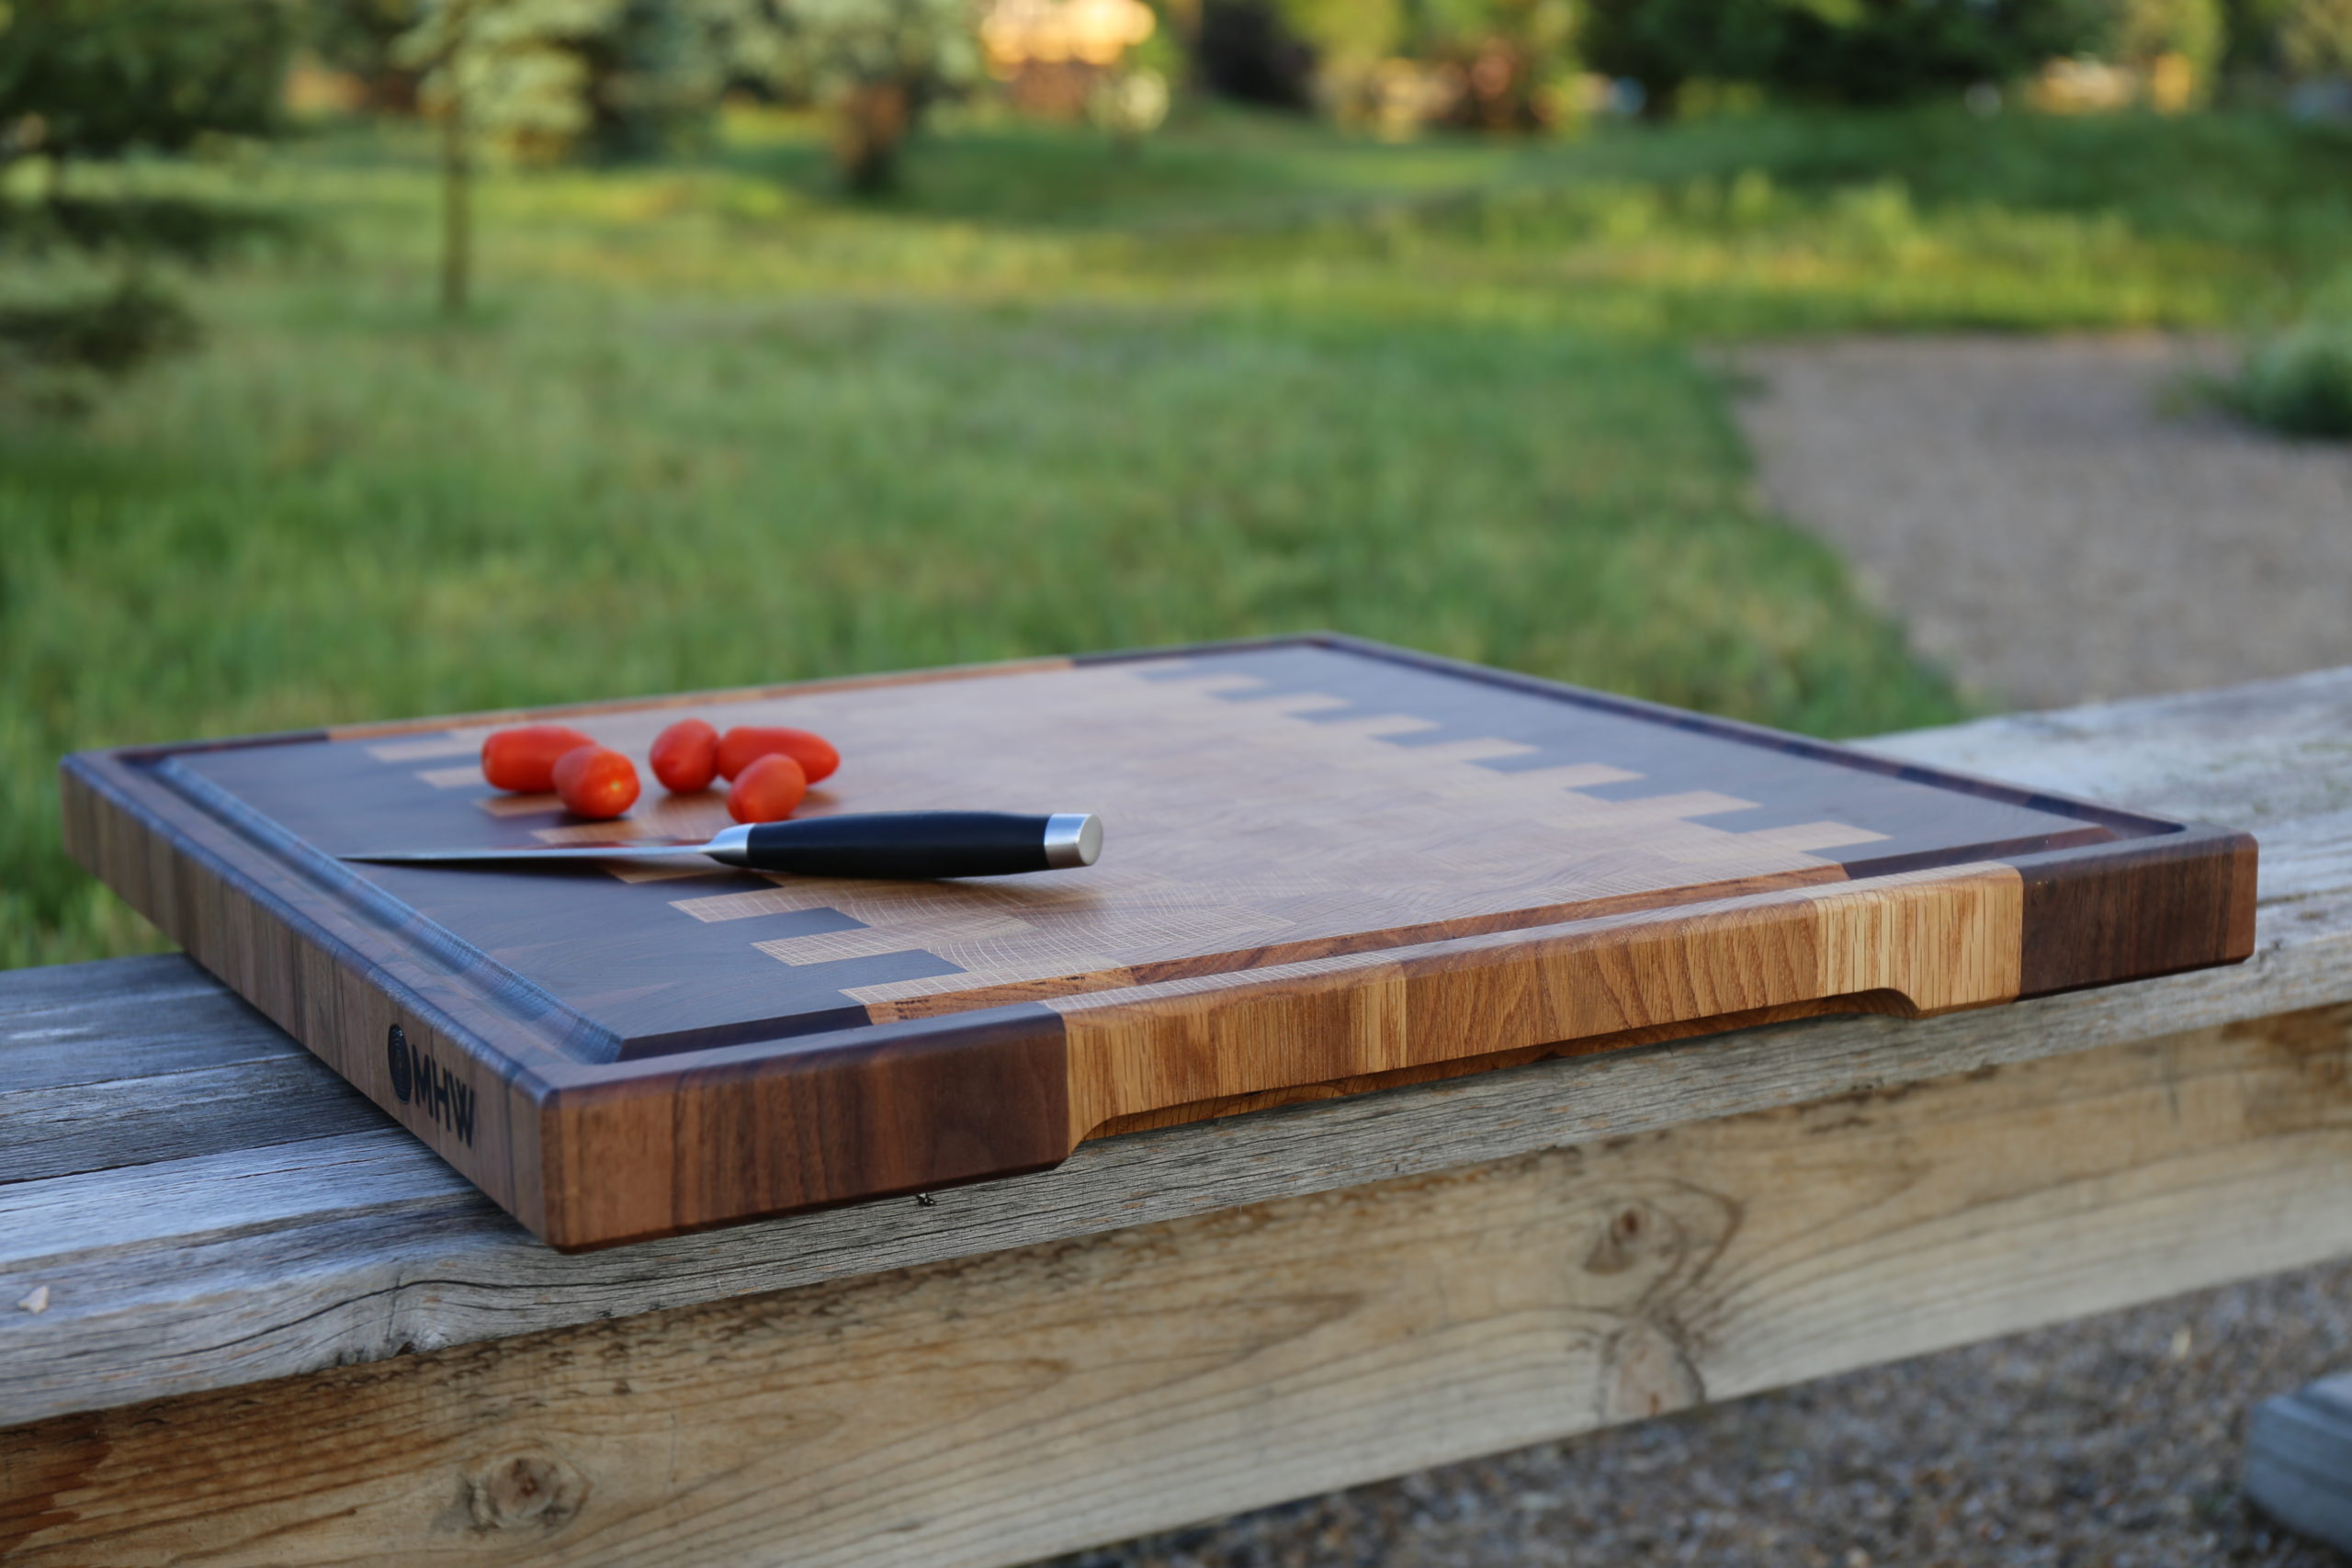 The Best Wooden Cutting Board for Your Kitchen in 2020